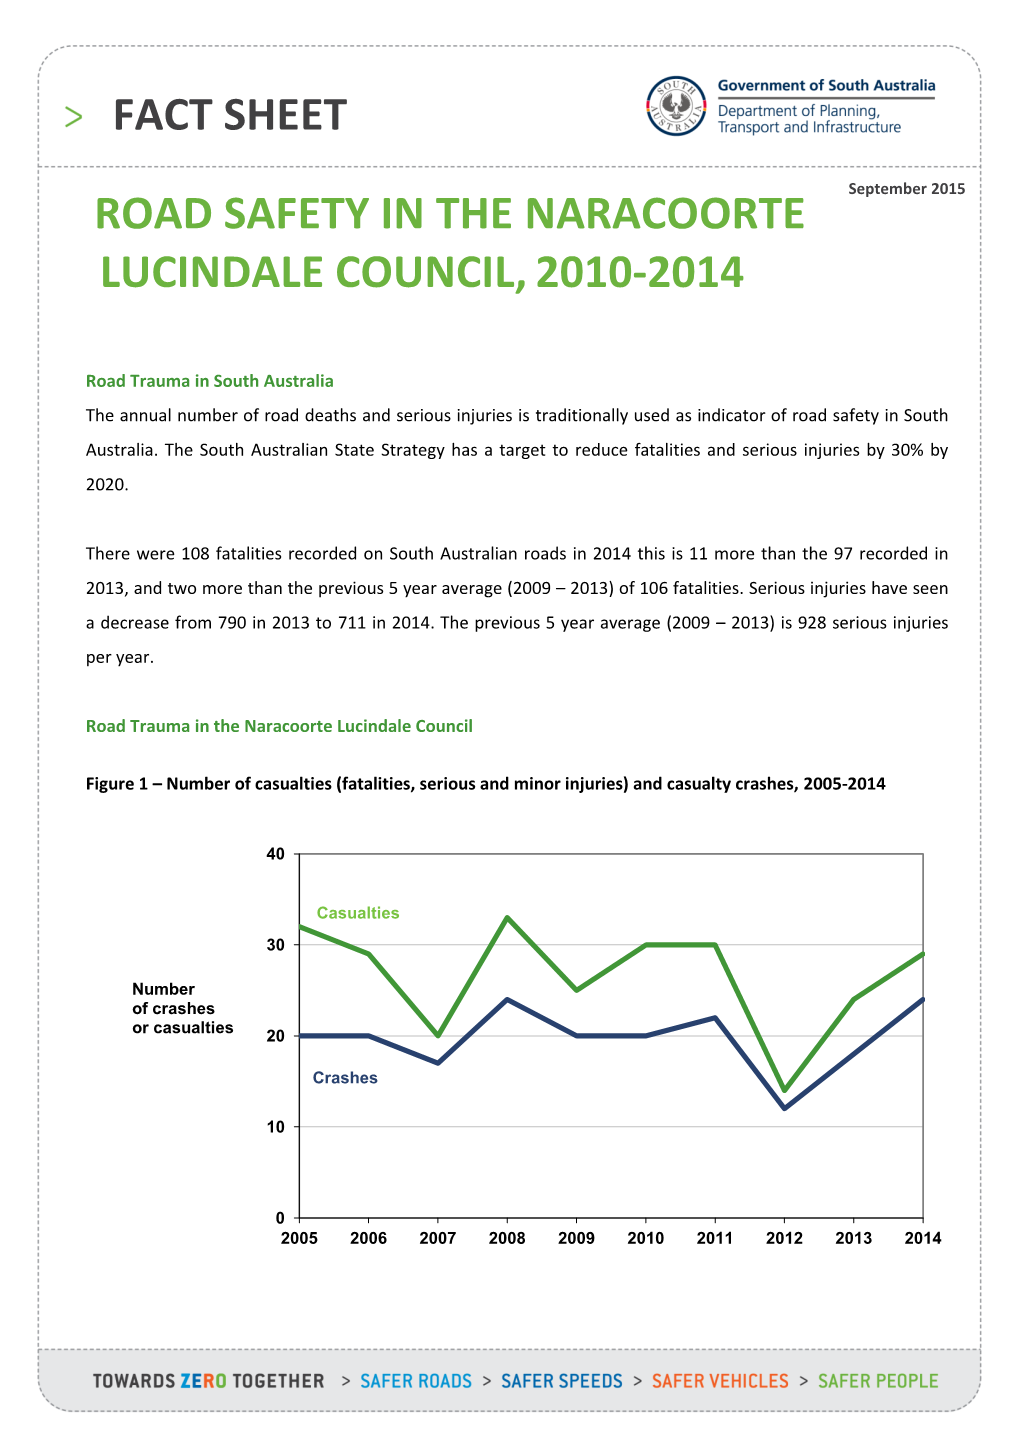 Naracoorte Lucindale Council, 2010-2014